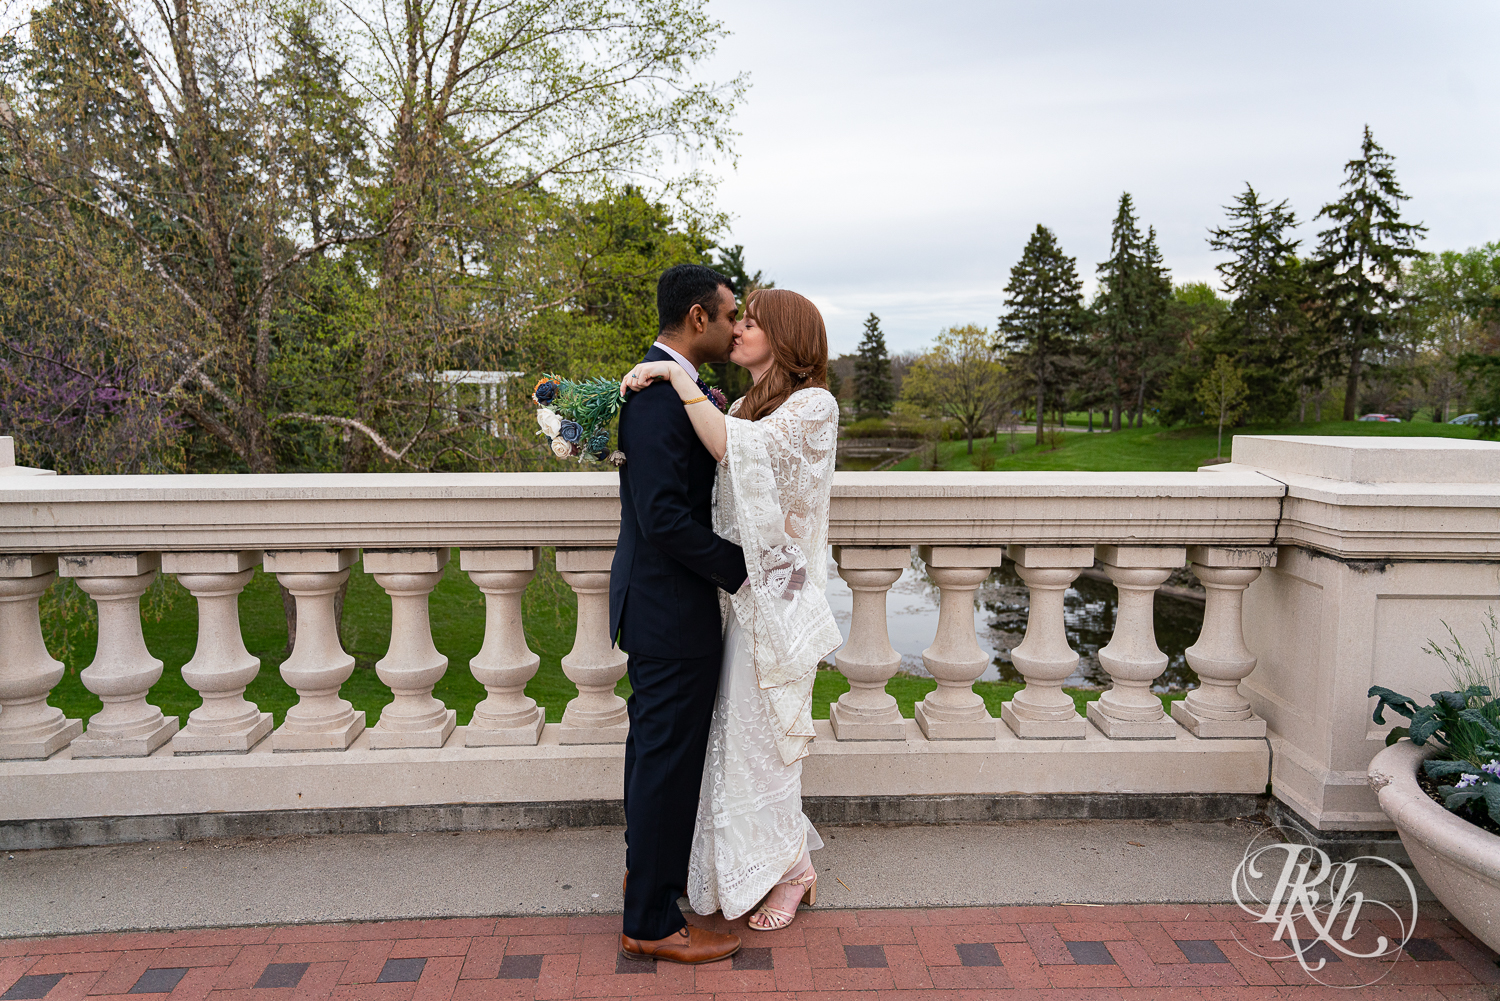 Bride and groom kiss outside at Indian wedding at Como Zoo Conservatory in Saint Paul, Minnesota.